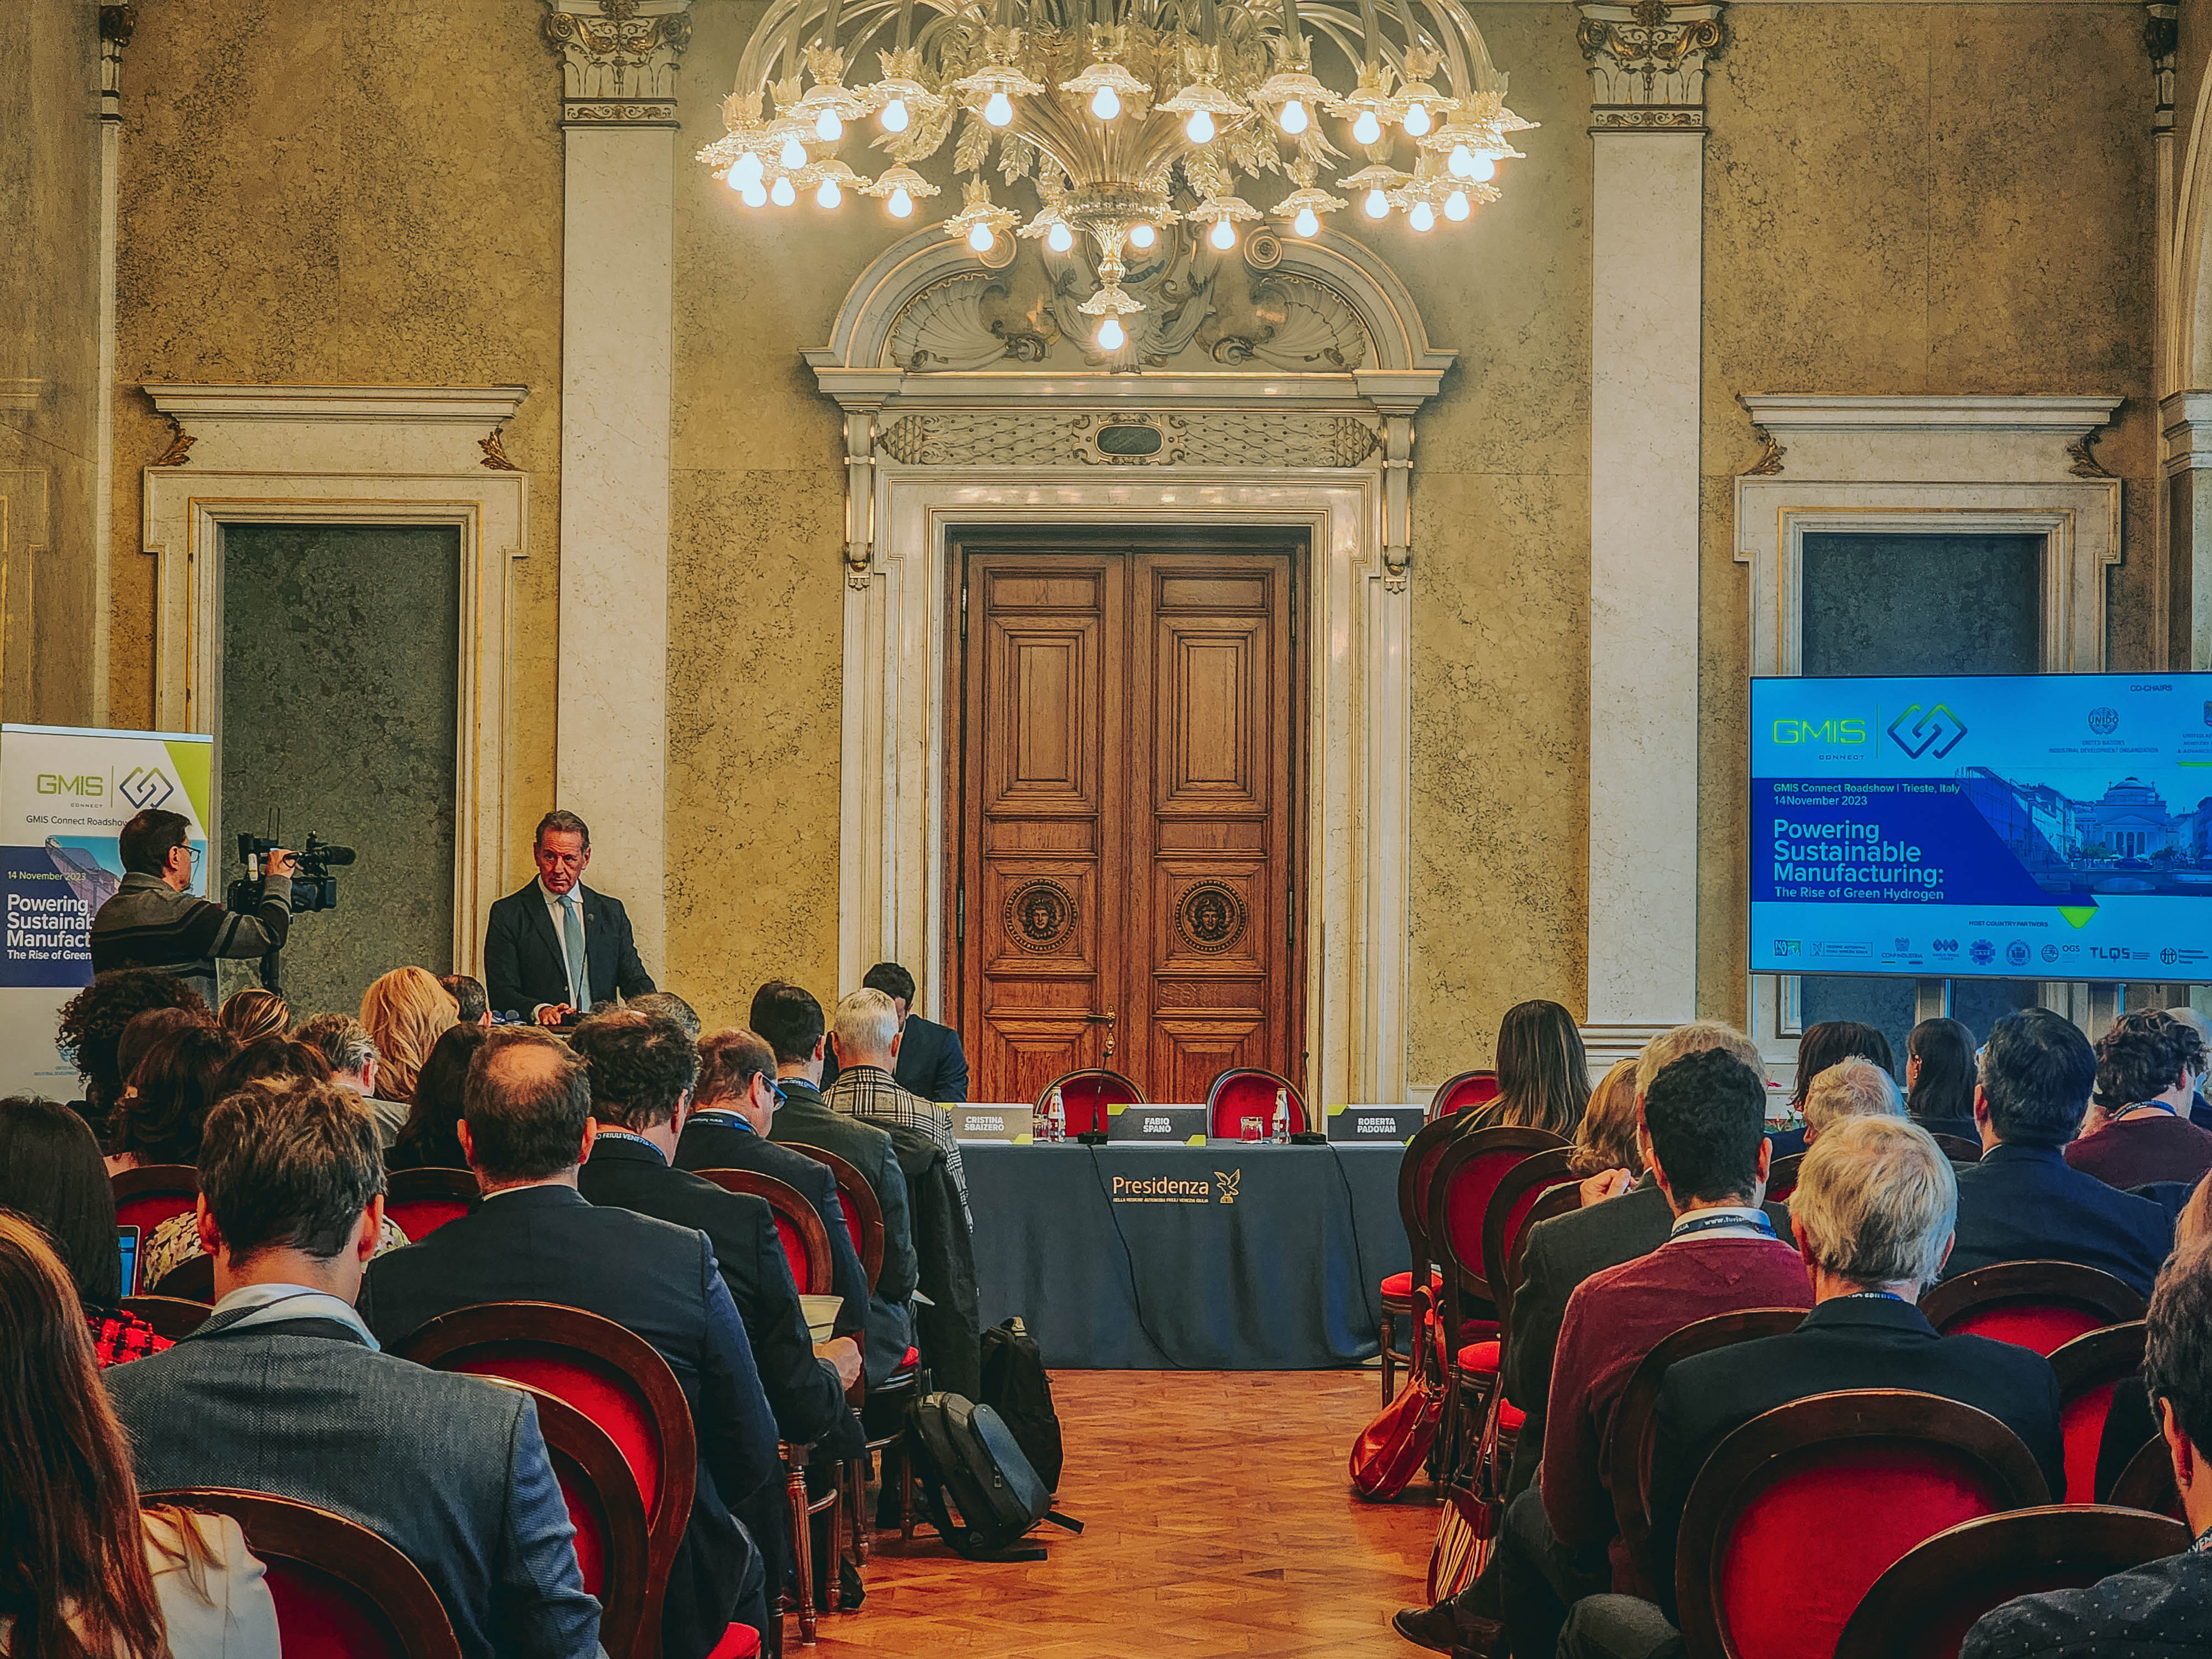 GMIS CONNECT – TRIESTE ROADSHOW CATALYZES GLOBAL COLLABORATION ON GREEN HYDROGEN AND SUSTAINABLE MANUFACTURING: EXPERTS FROM UAE AND ITALY UNITE FOR A GREENER INDUSTRIAL FUTURE IN PREPARATION FOR COP28 